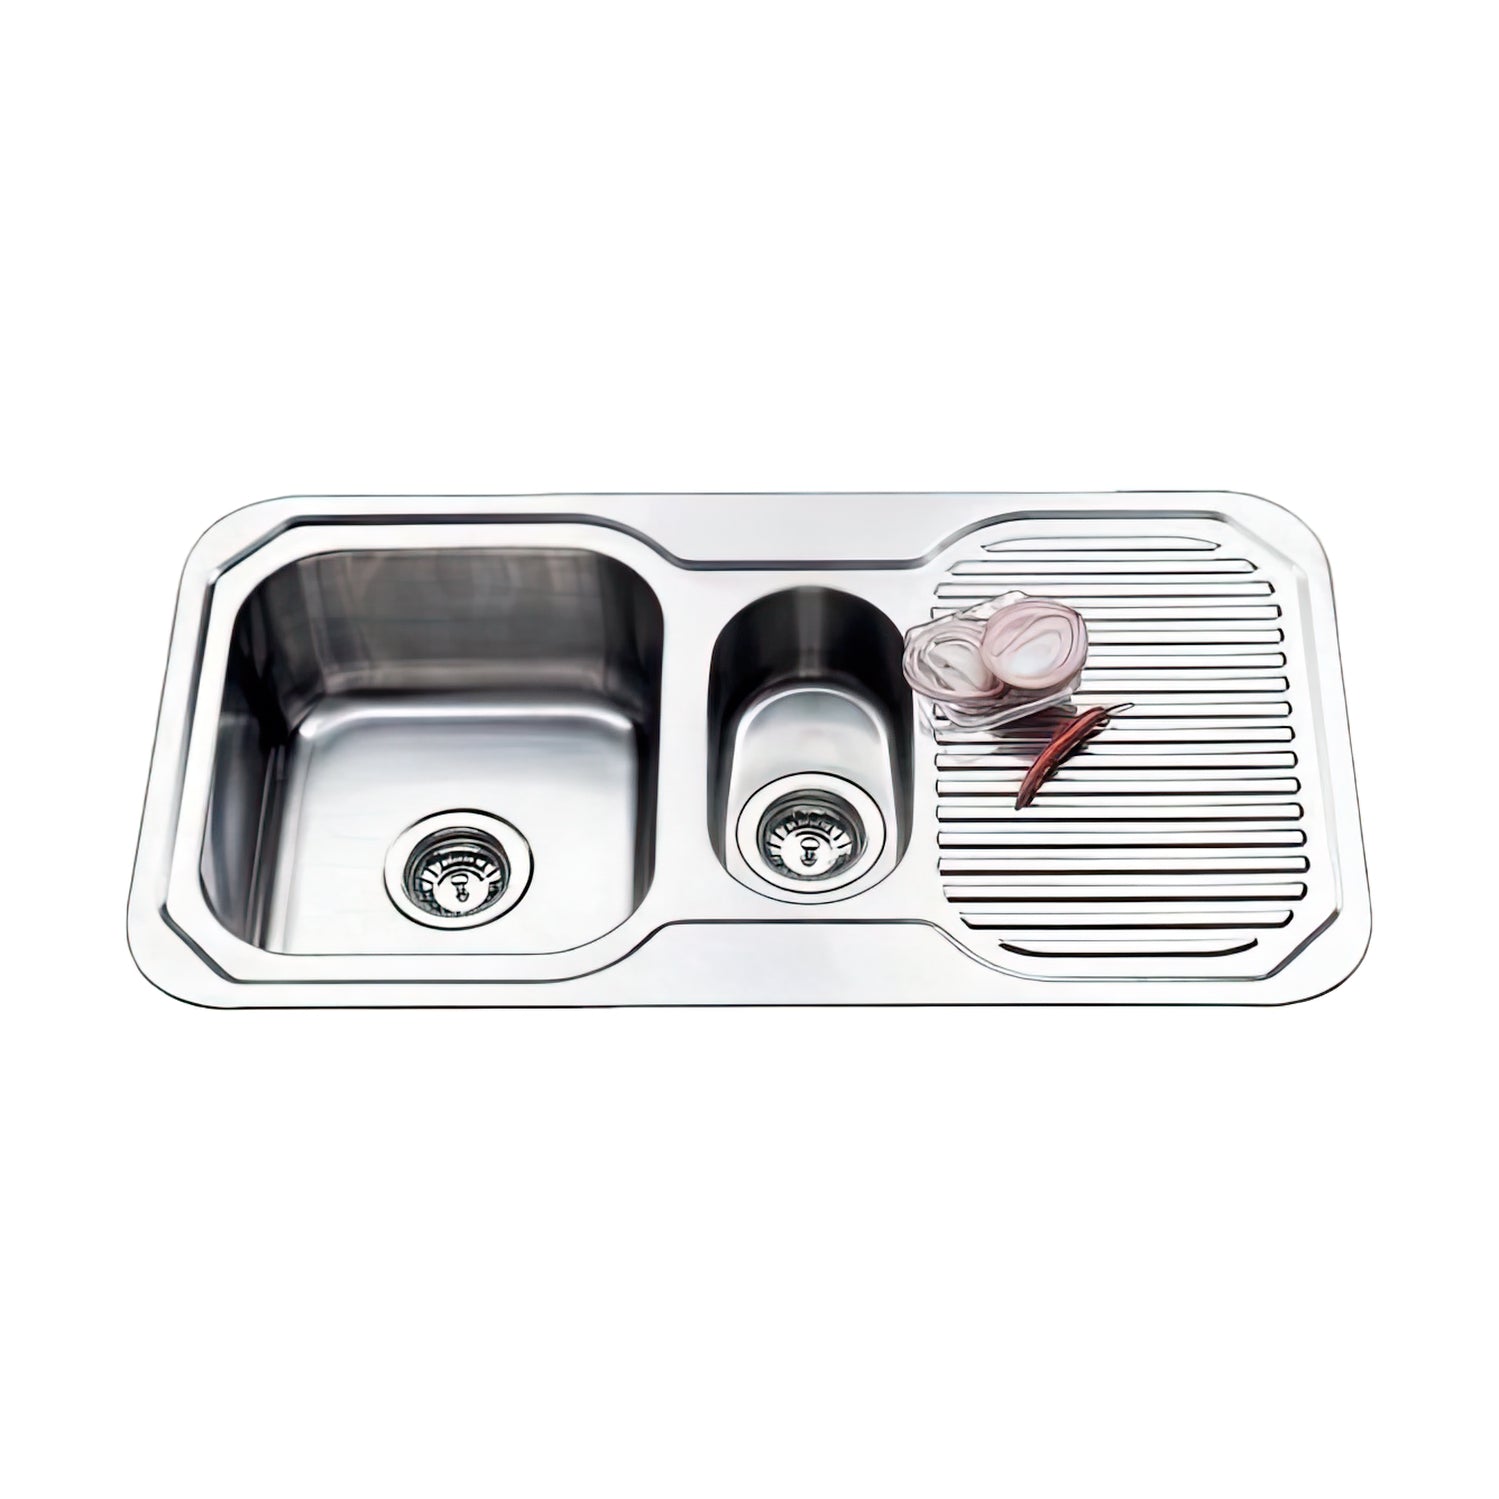 890 Ariette 1 And 1/4 Bowl Sink